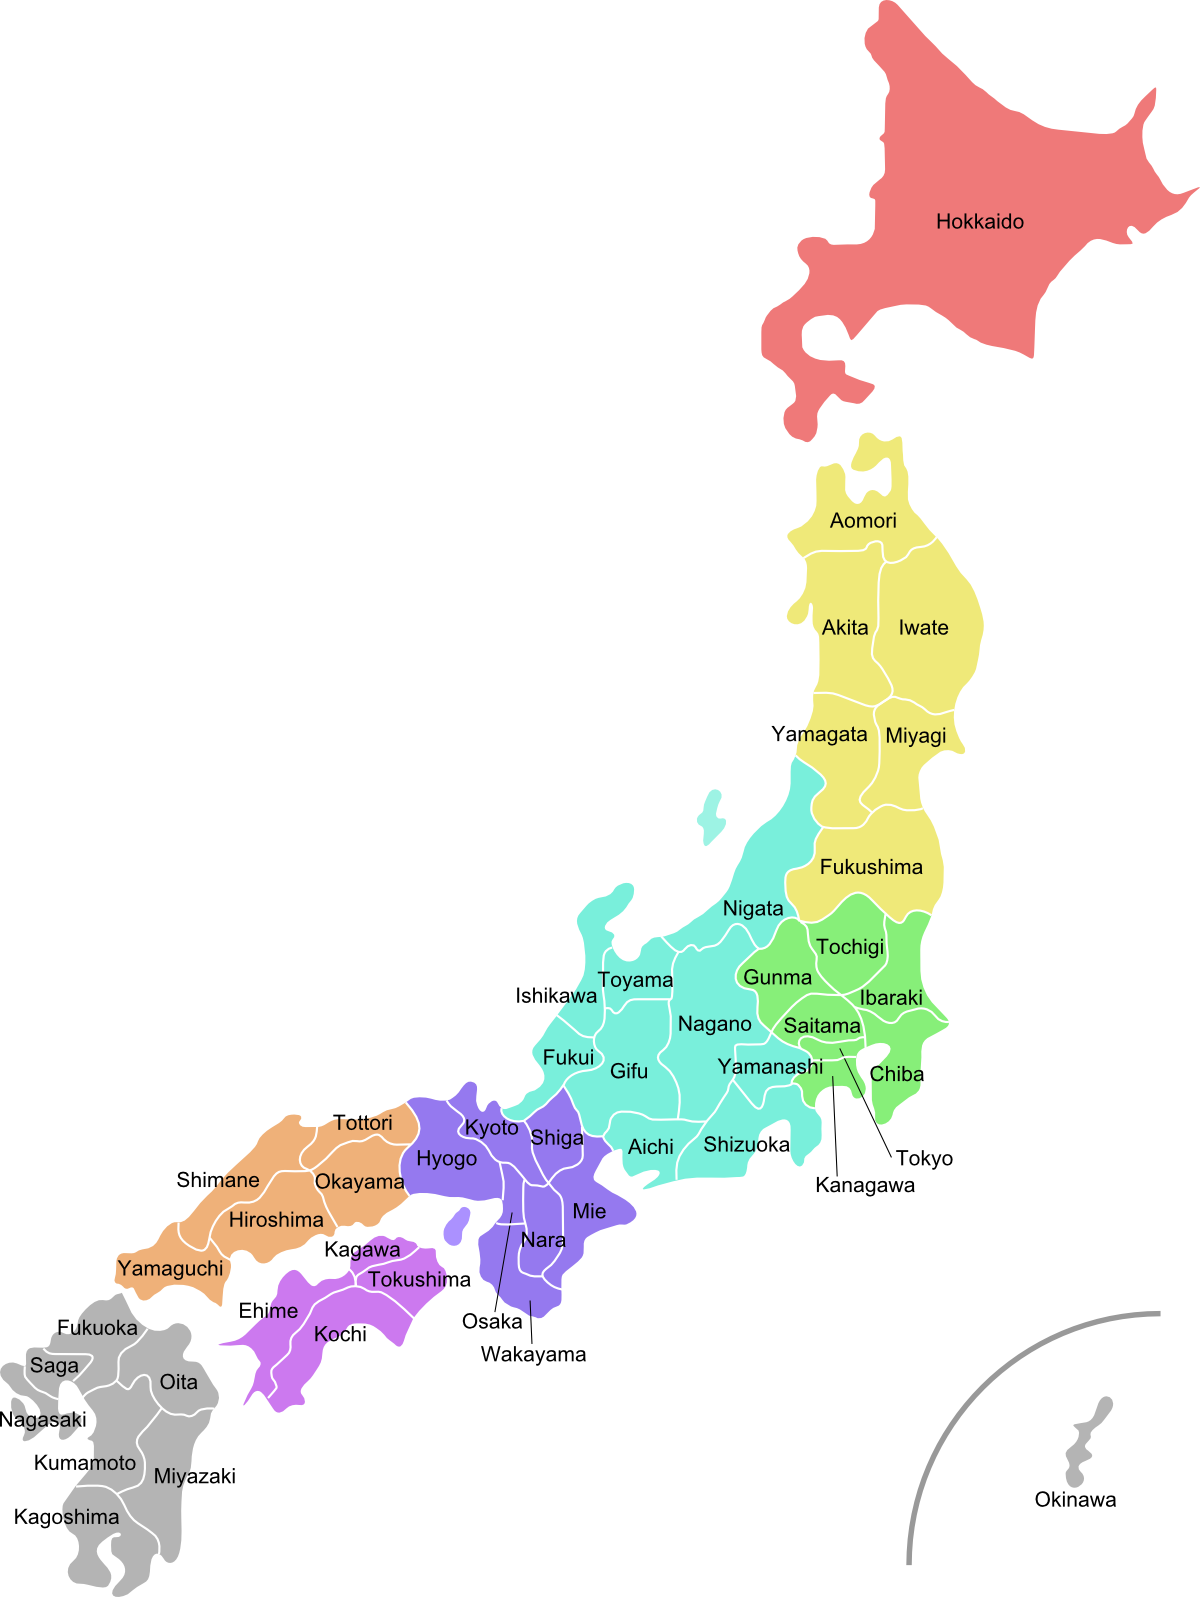 Map of Japan with the names of the prefectures in English. (Public domain via Wikimedia thanks to Tokyoship)